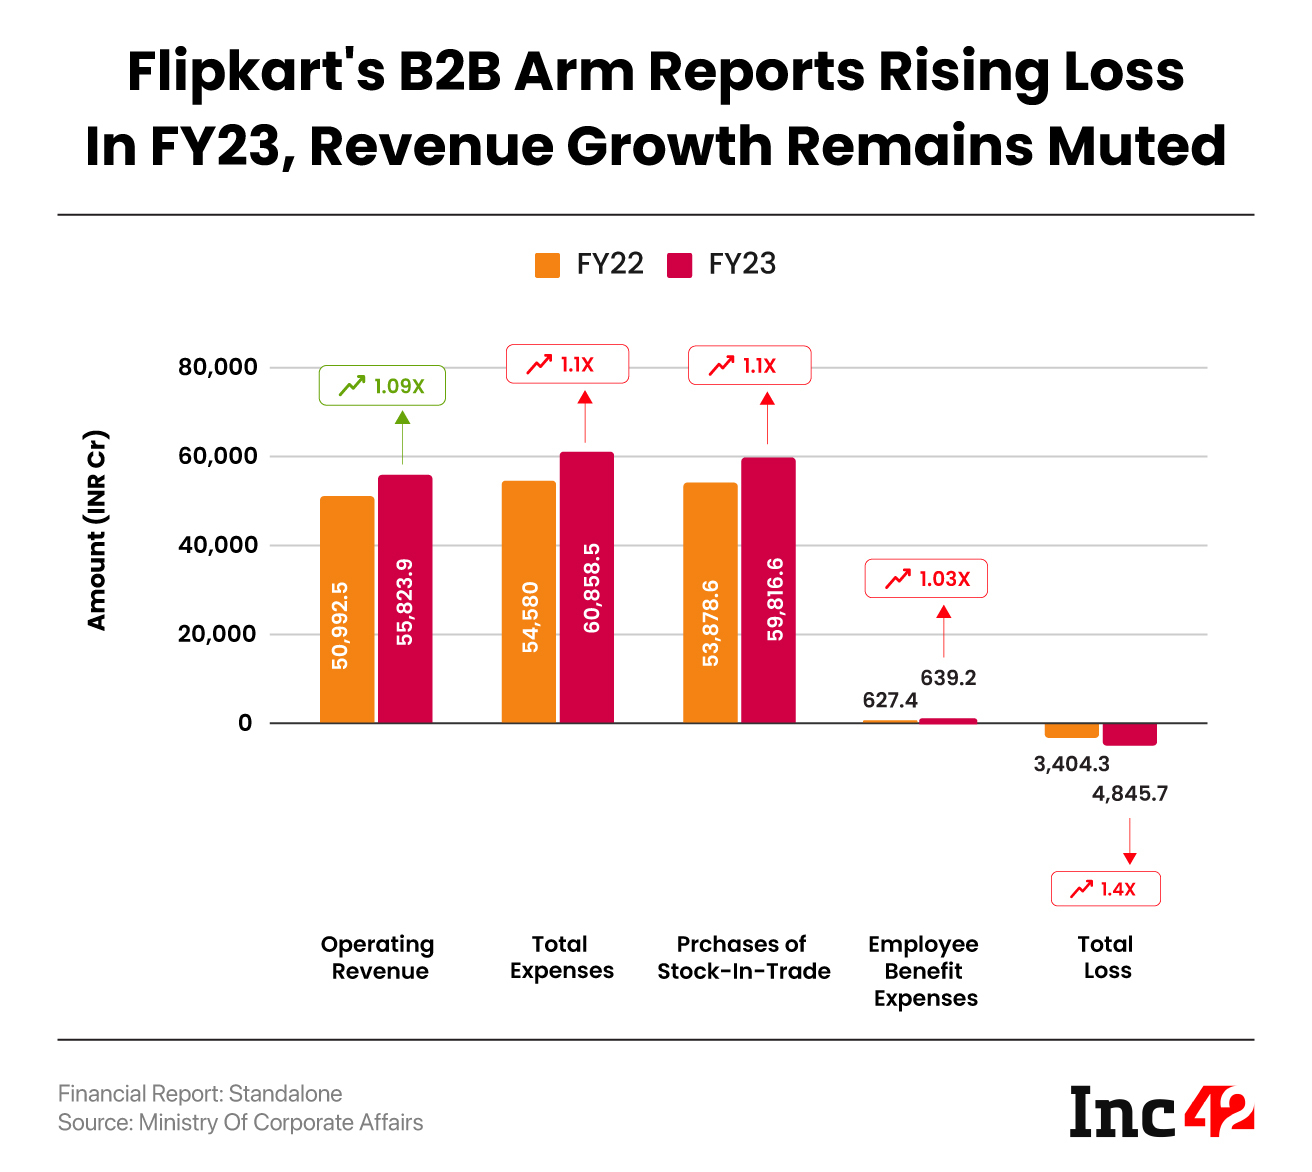 Flipkart's B2B Arm Reports Rising Loss In FY23, Revenue Growth Remains Muted